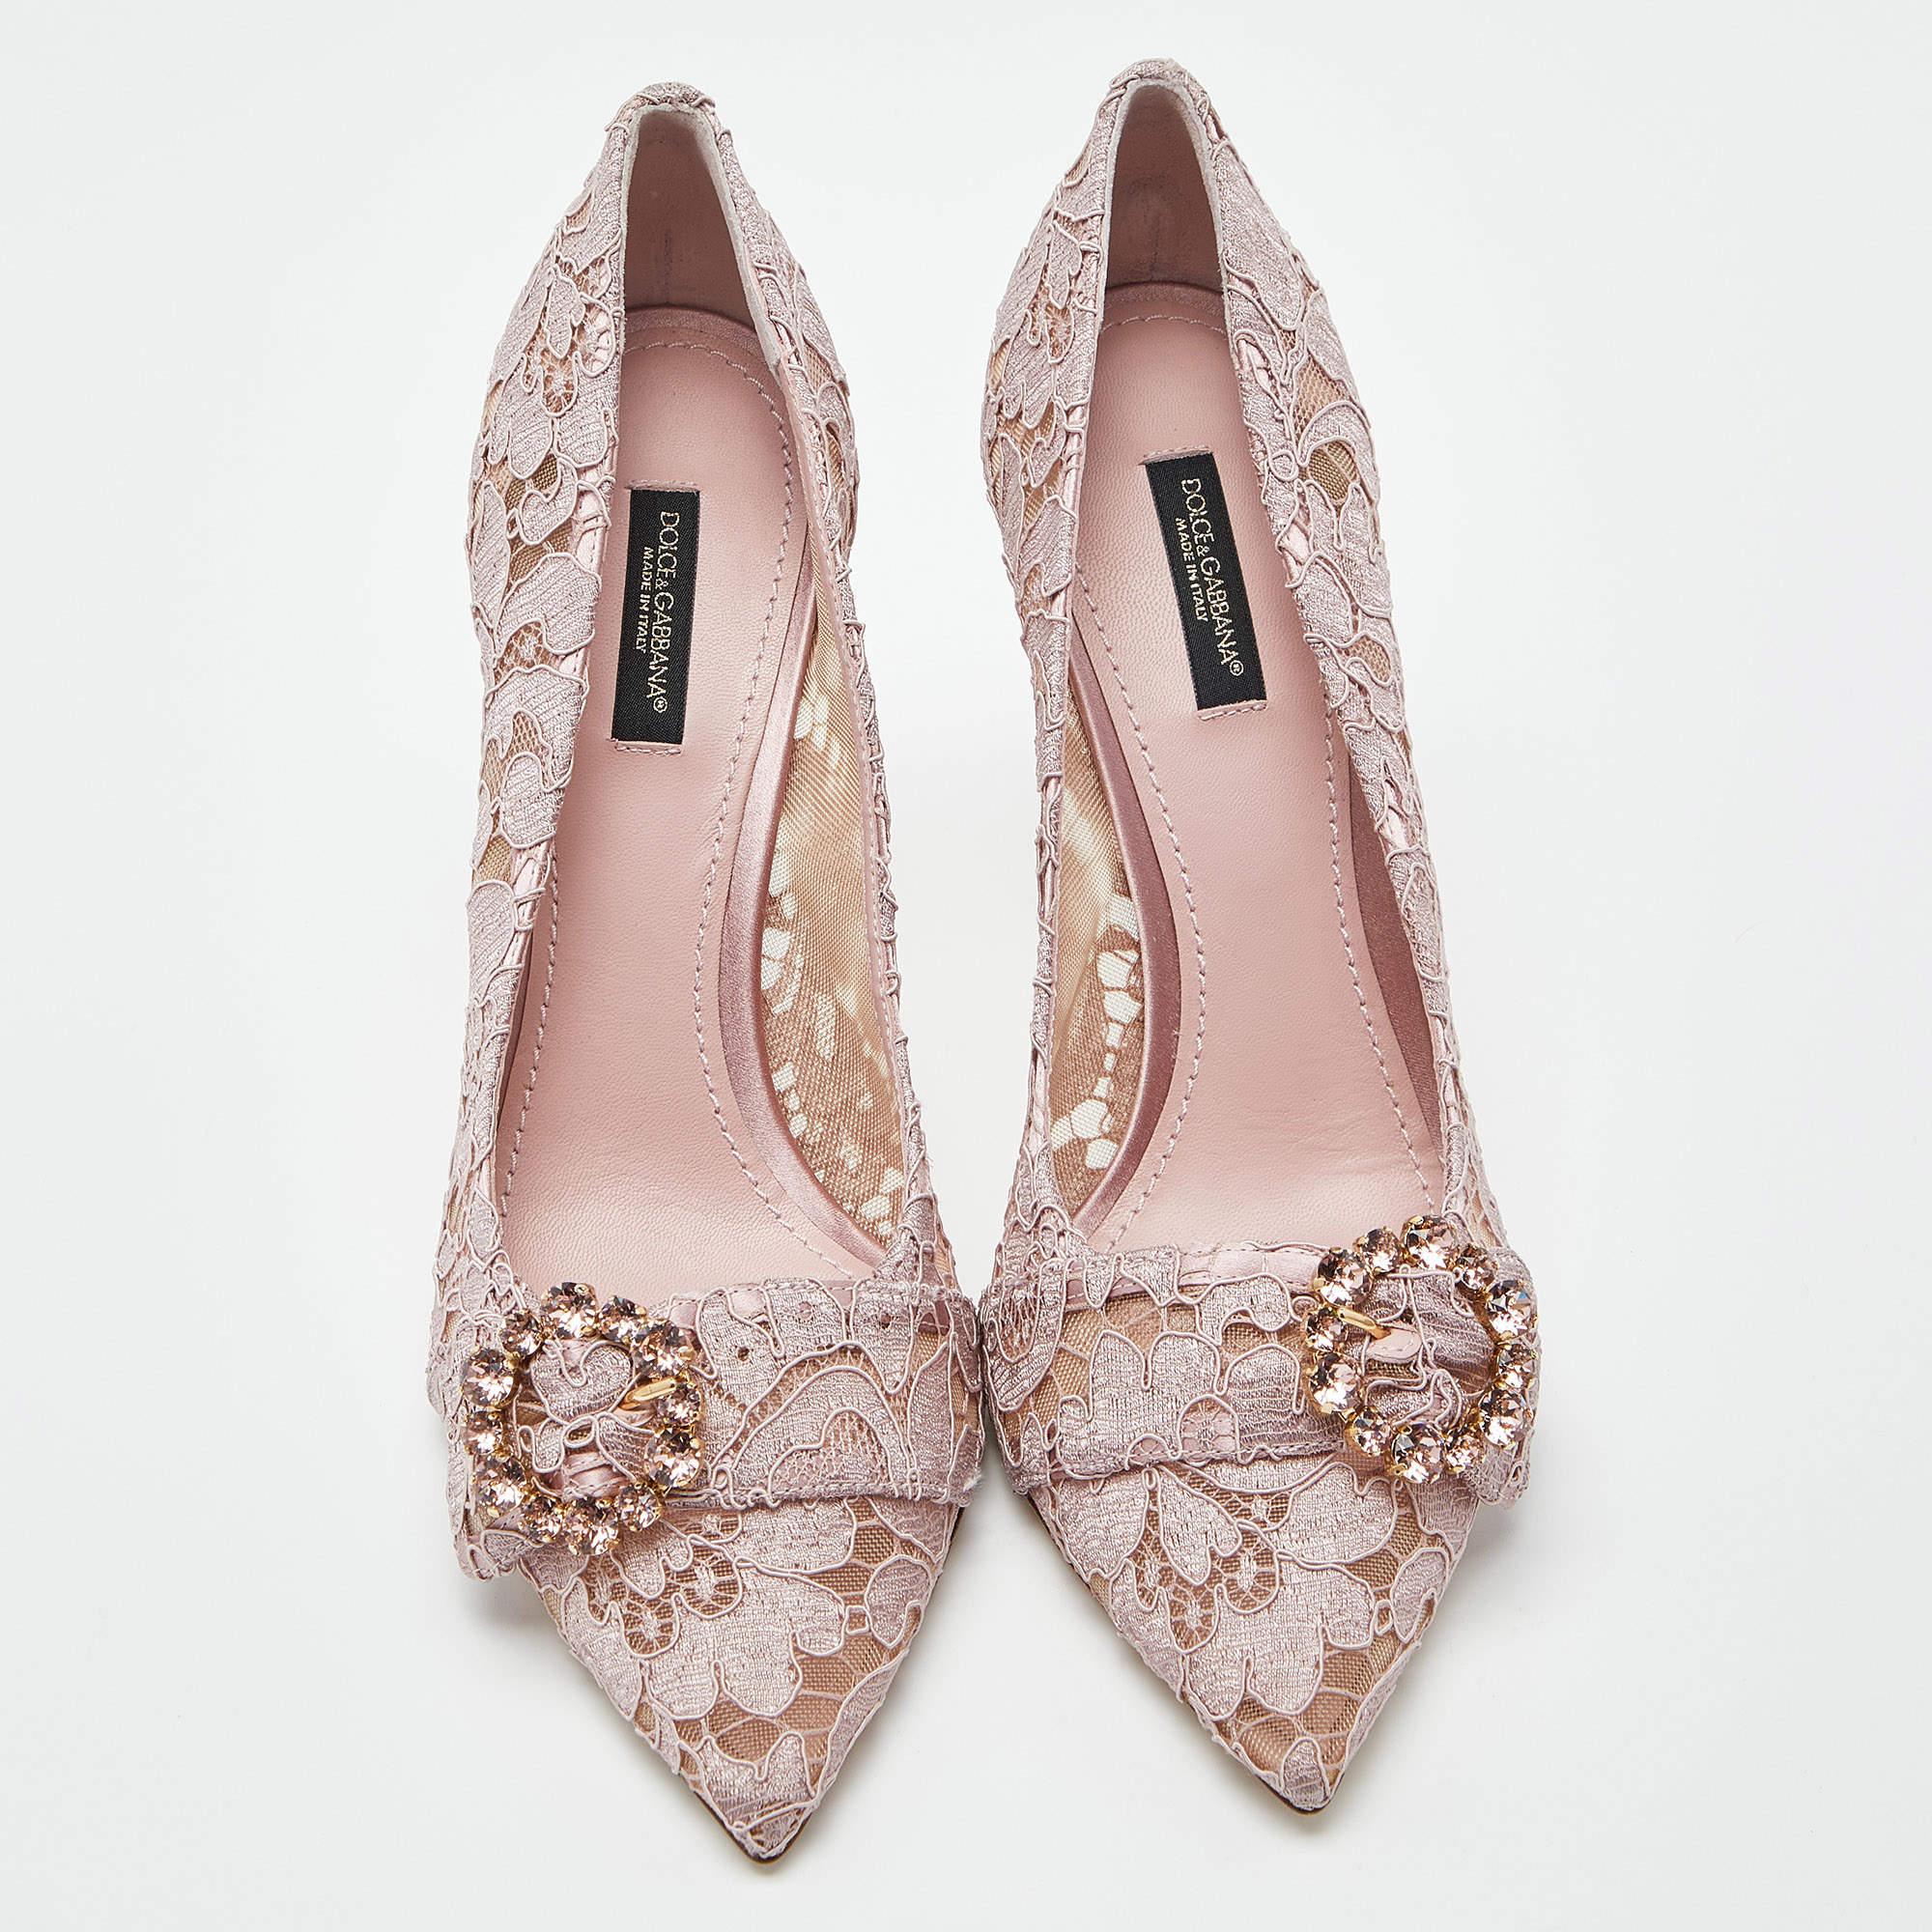 With intricate lace detailing, this pair of Dolce & Gabbana pumps is classy in a lilac shade. Elevated on 10cm heels, it features crystal embellishment on the top and embodies an architectural silhouette.

Includes: Original Box, Original Dustbag

